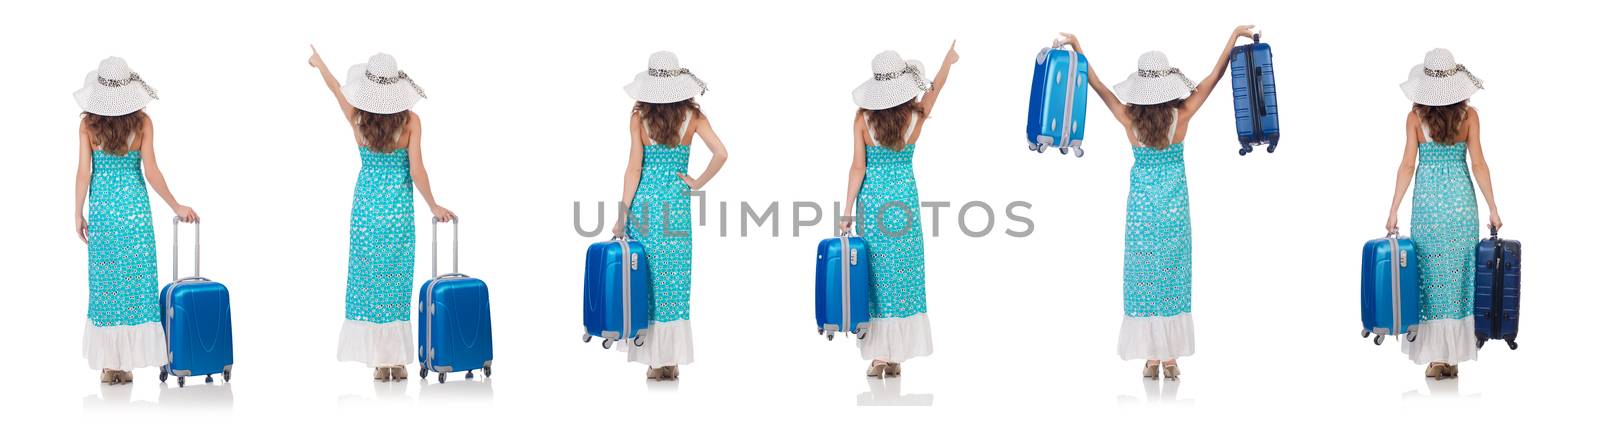 Woman preparing for travel on summer vacation by Elnur